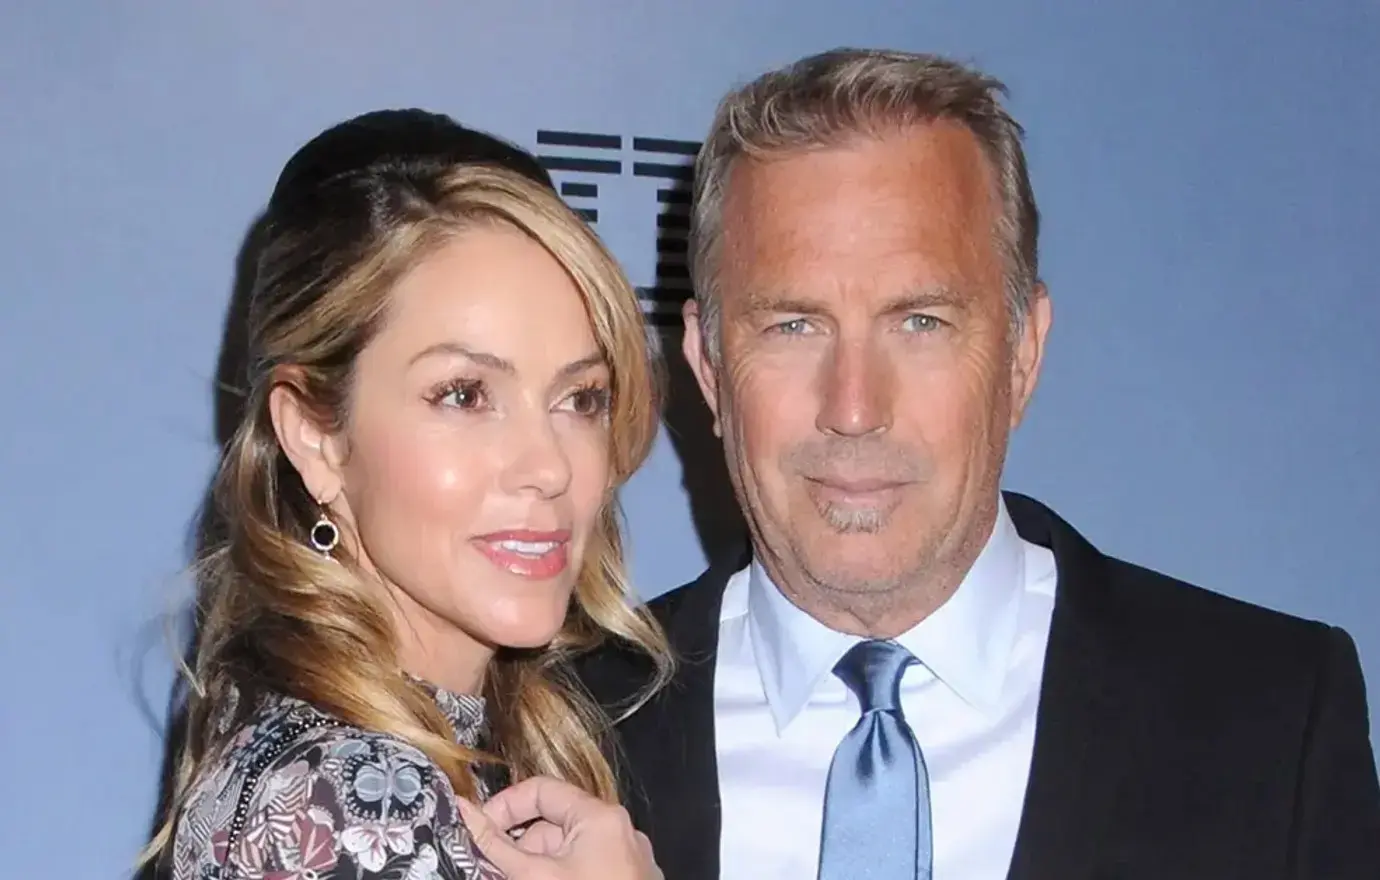 Kevin Costner Accuses Estranged Wife of Pandering to Media With Eviction Accusations